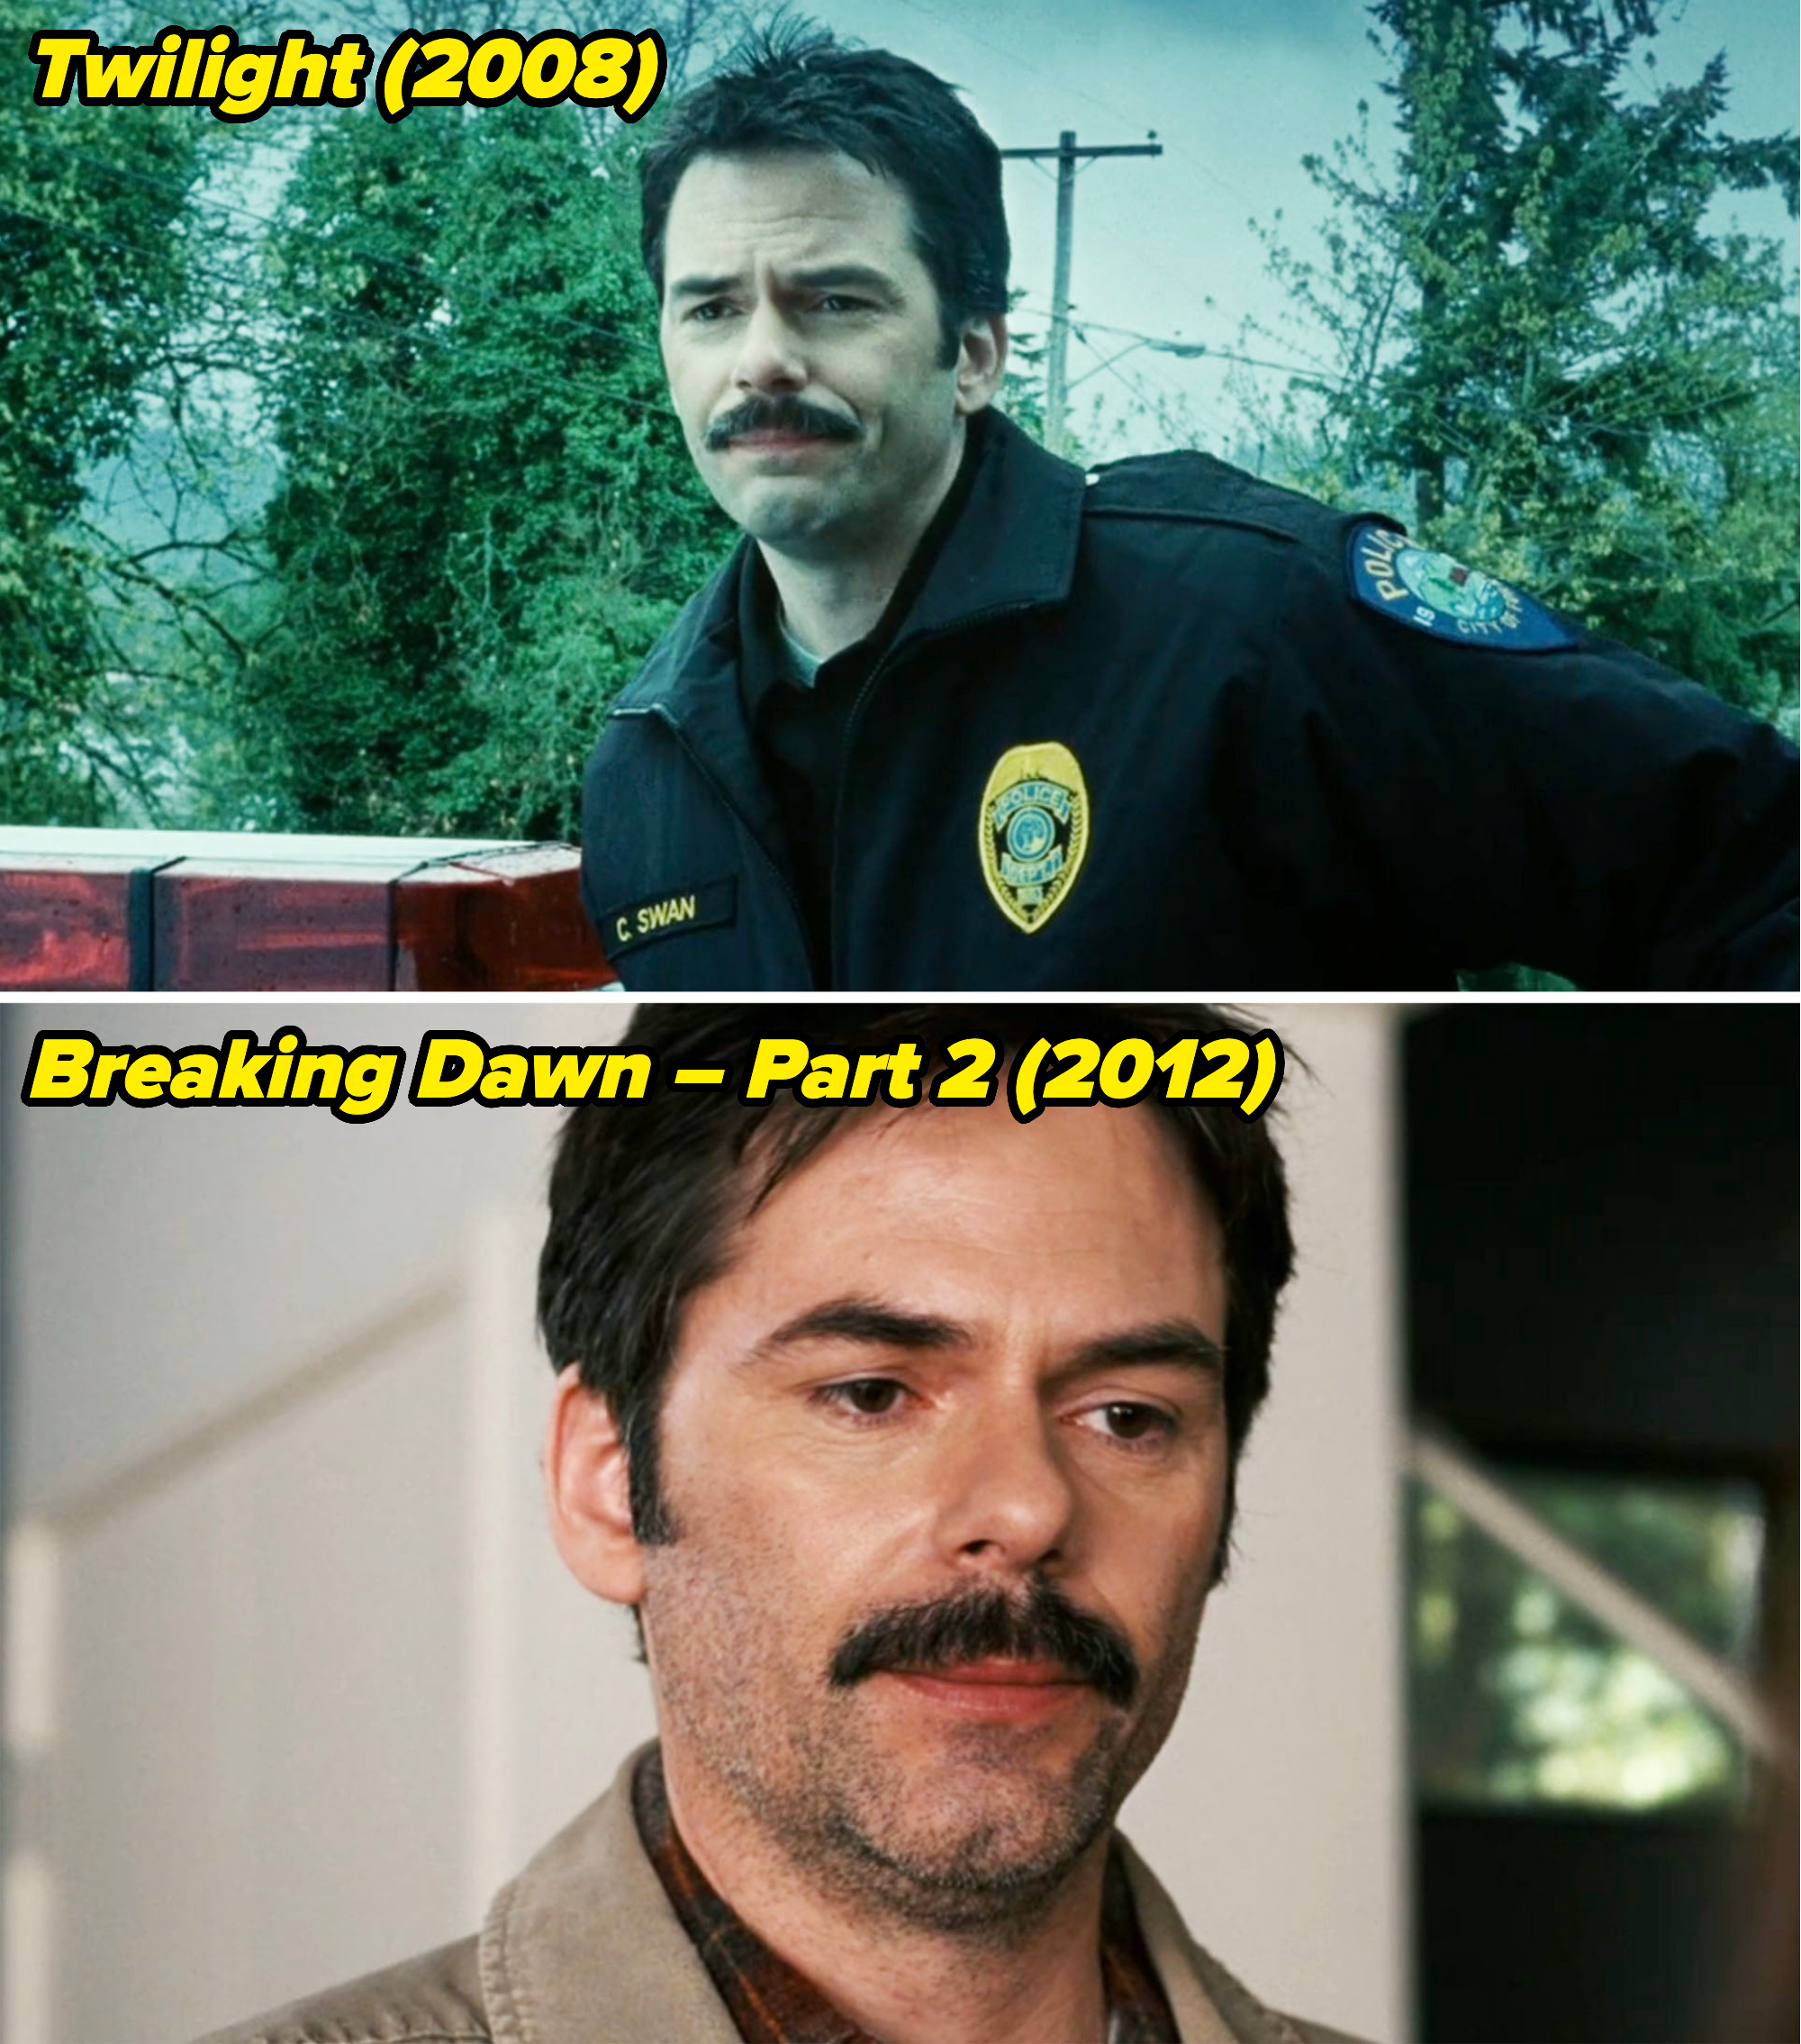 him wearing a cop uniform in the first movie and a closeup of him in the last film